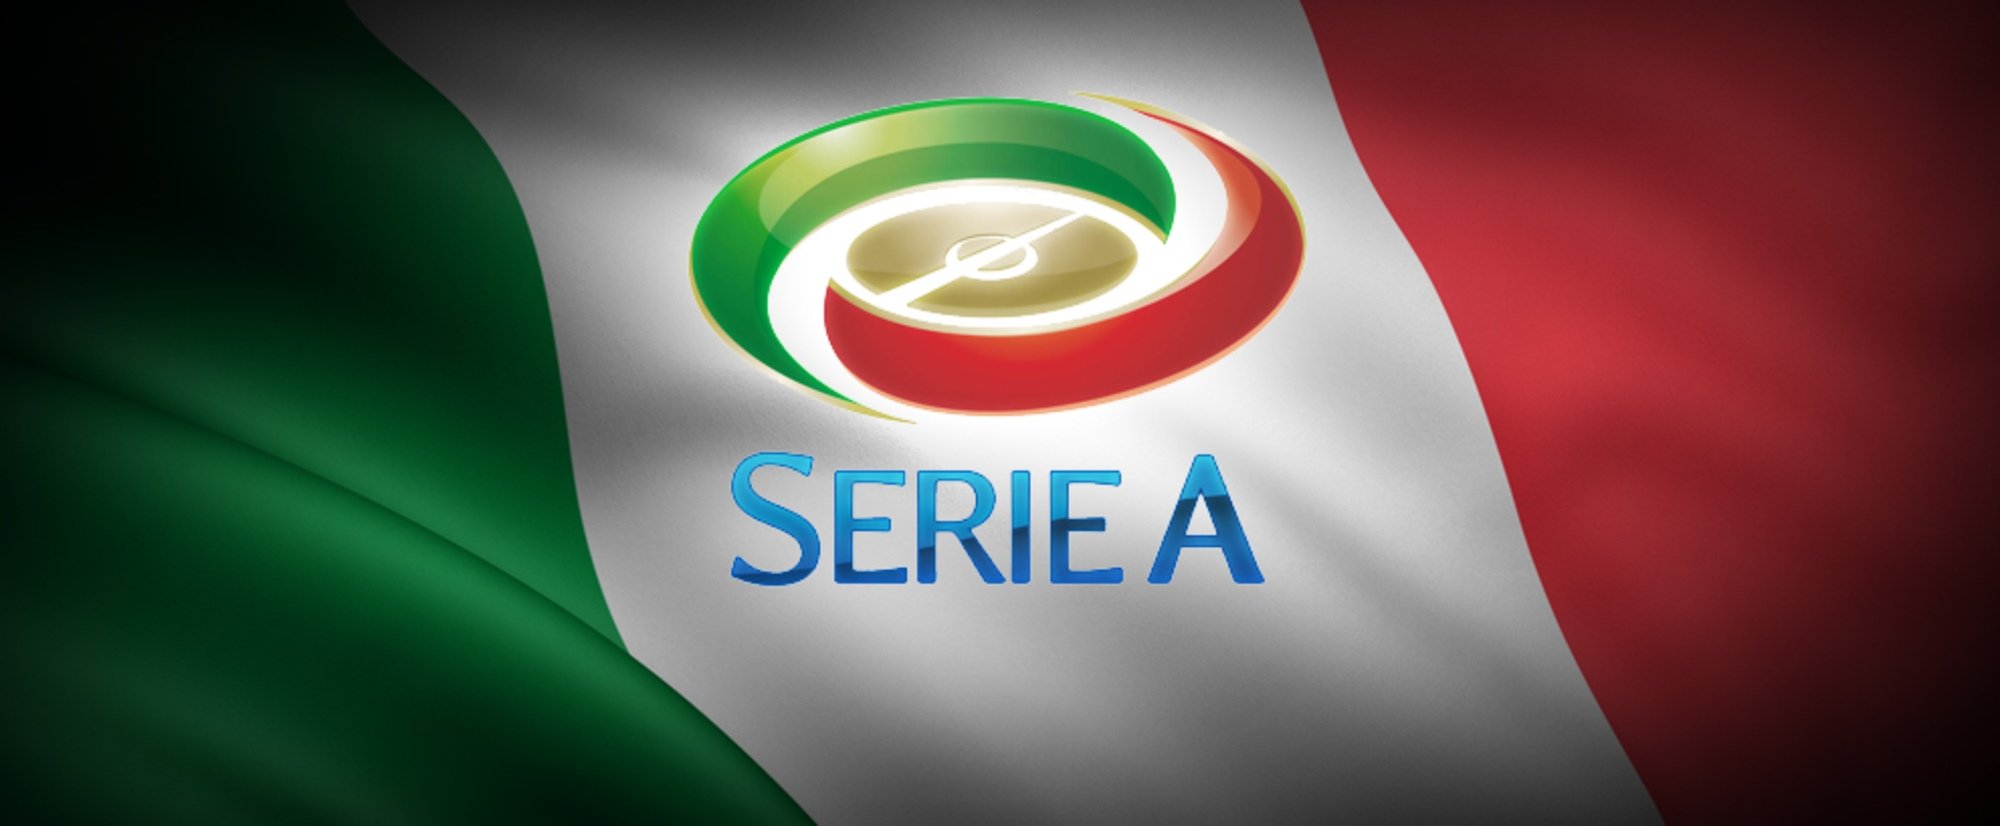 the-resumption-of-the-football-season-in-italy-may-begin-with-the-cup-semi-final-matches